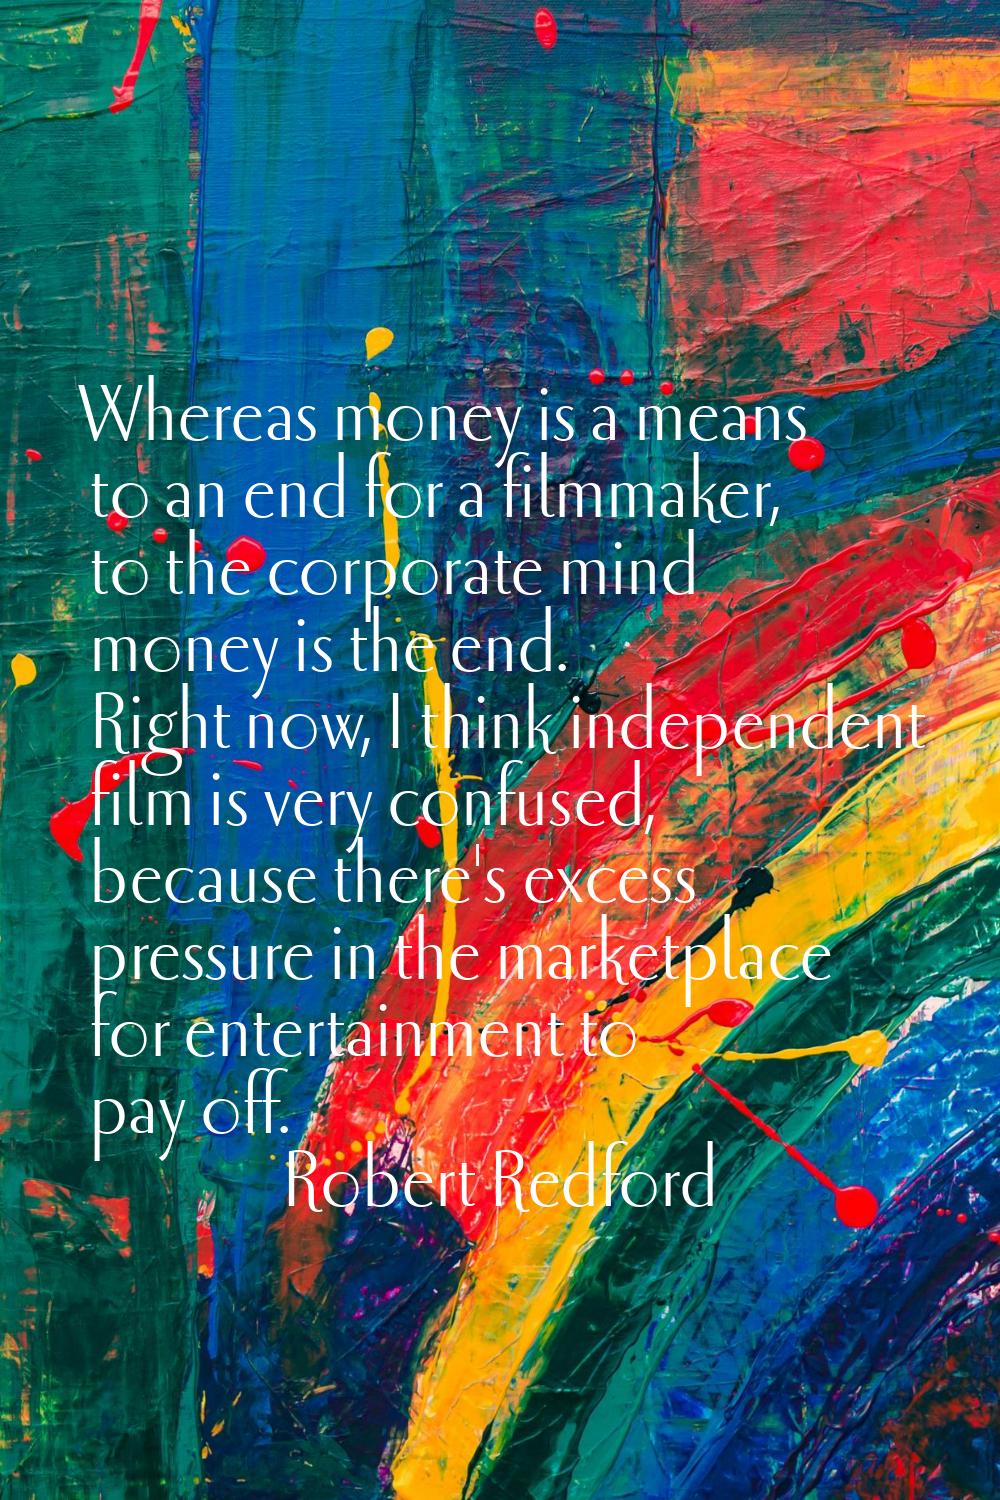 Whereas money is a means to an end for a filmmaker, to the corporate mind money is the end. Right n